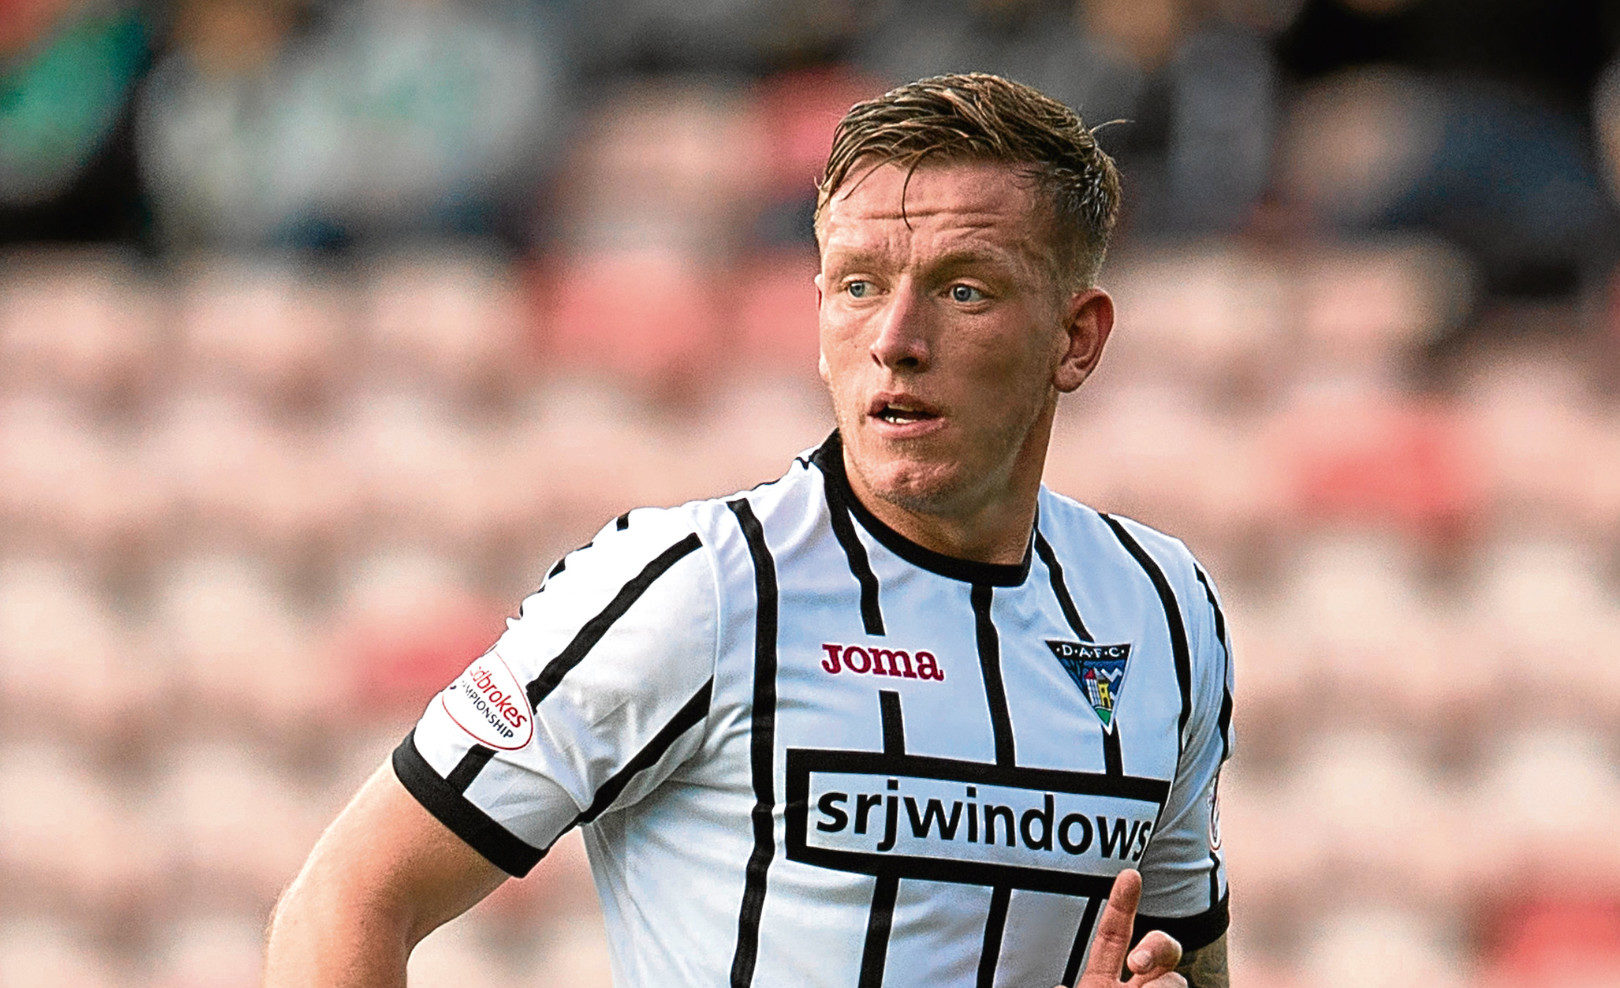 Lee Ashcroft joined Dundee this summer on two-year deal.